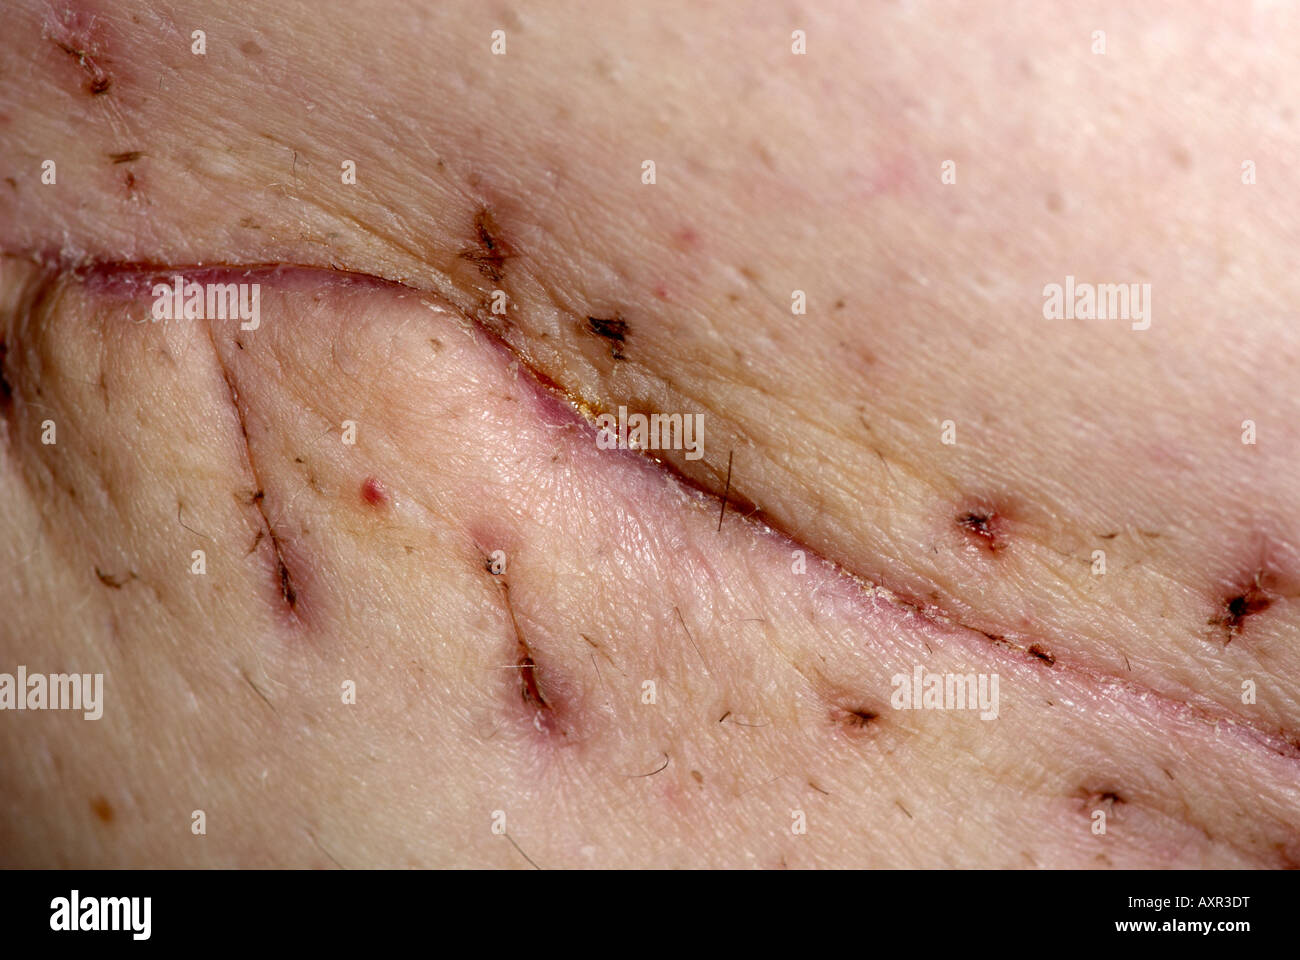 Scar on left inner thigh from operation to remove a high grade